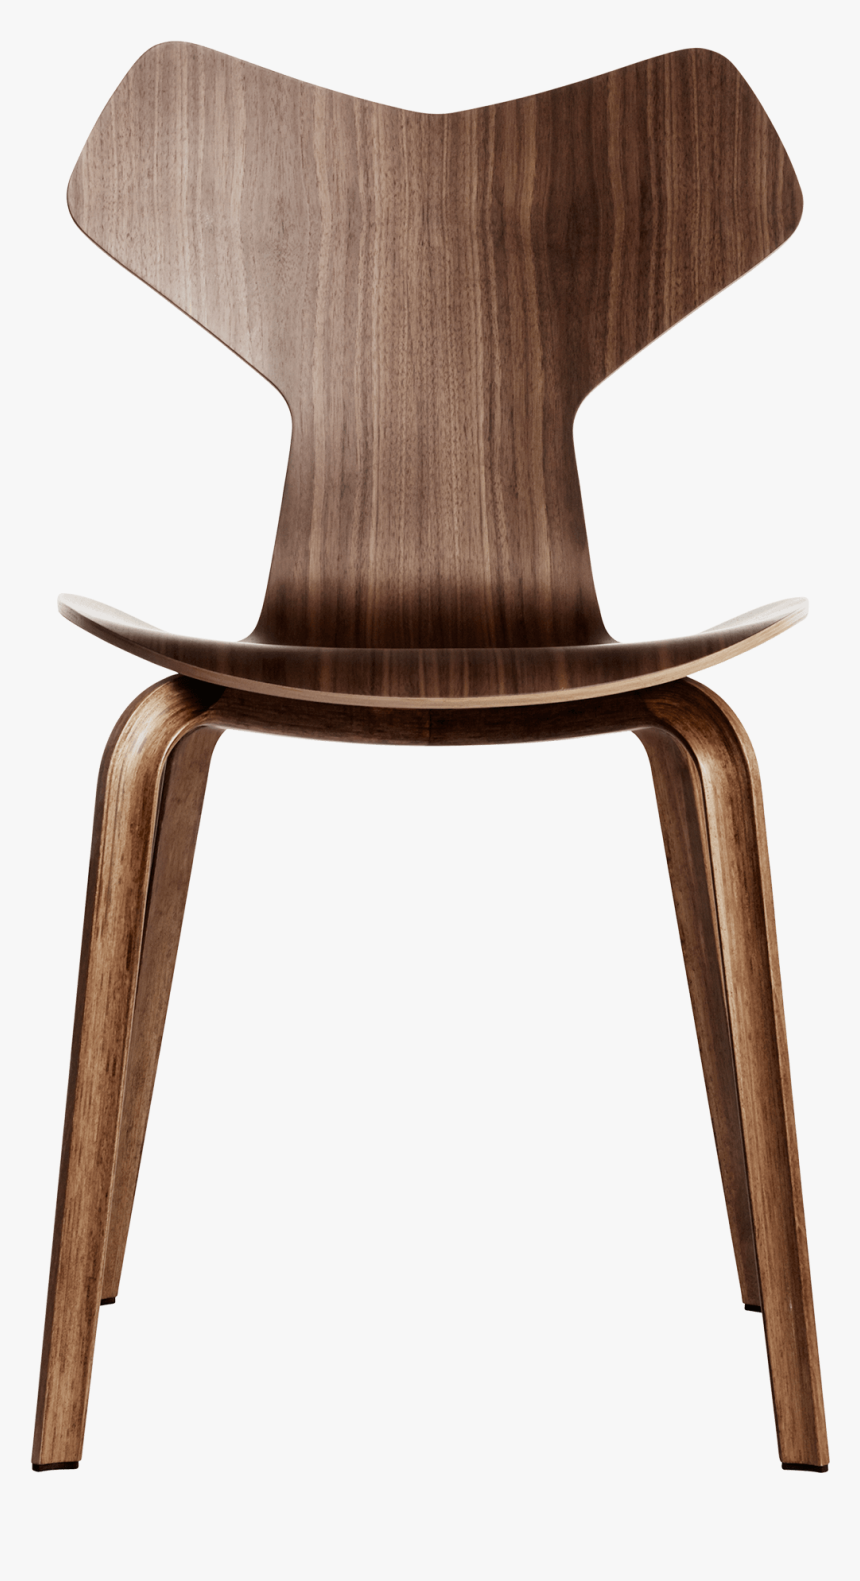 Grand Prix Chair Arne Jacobsen Clear Lacquered Walnut - Arne Jacobsen, HD Png Download, Free Download